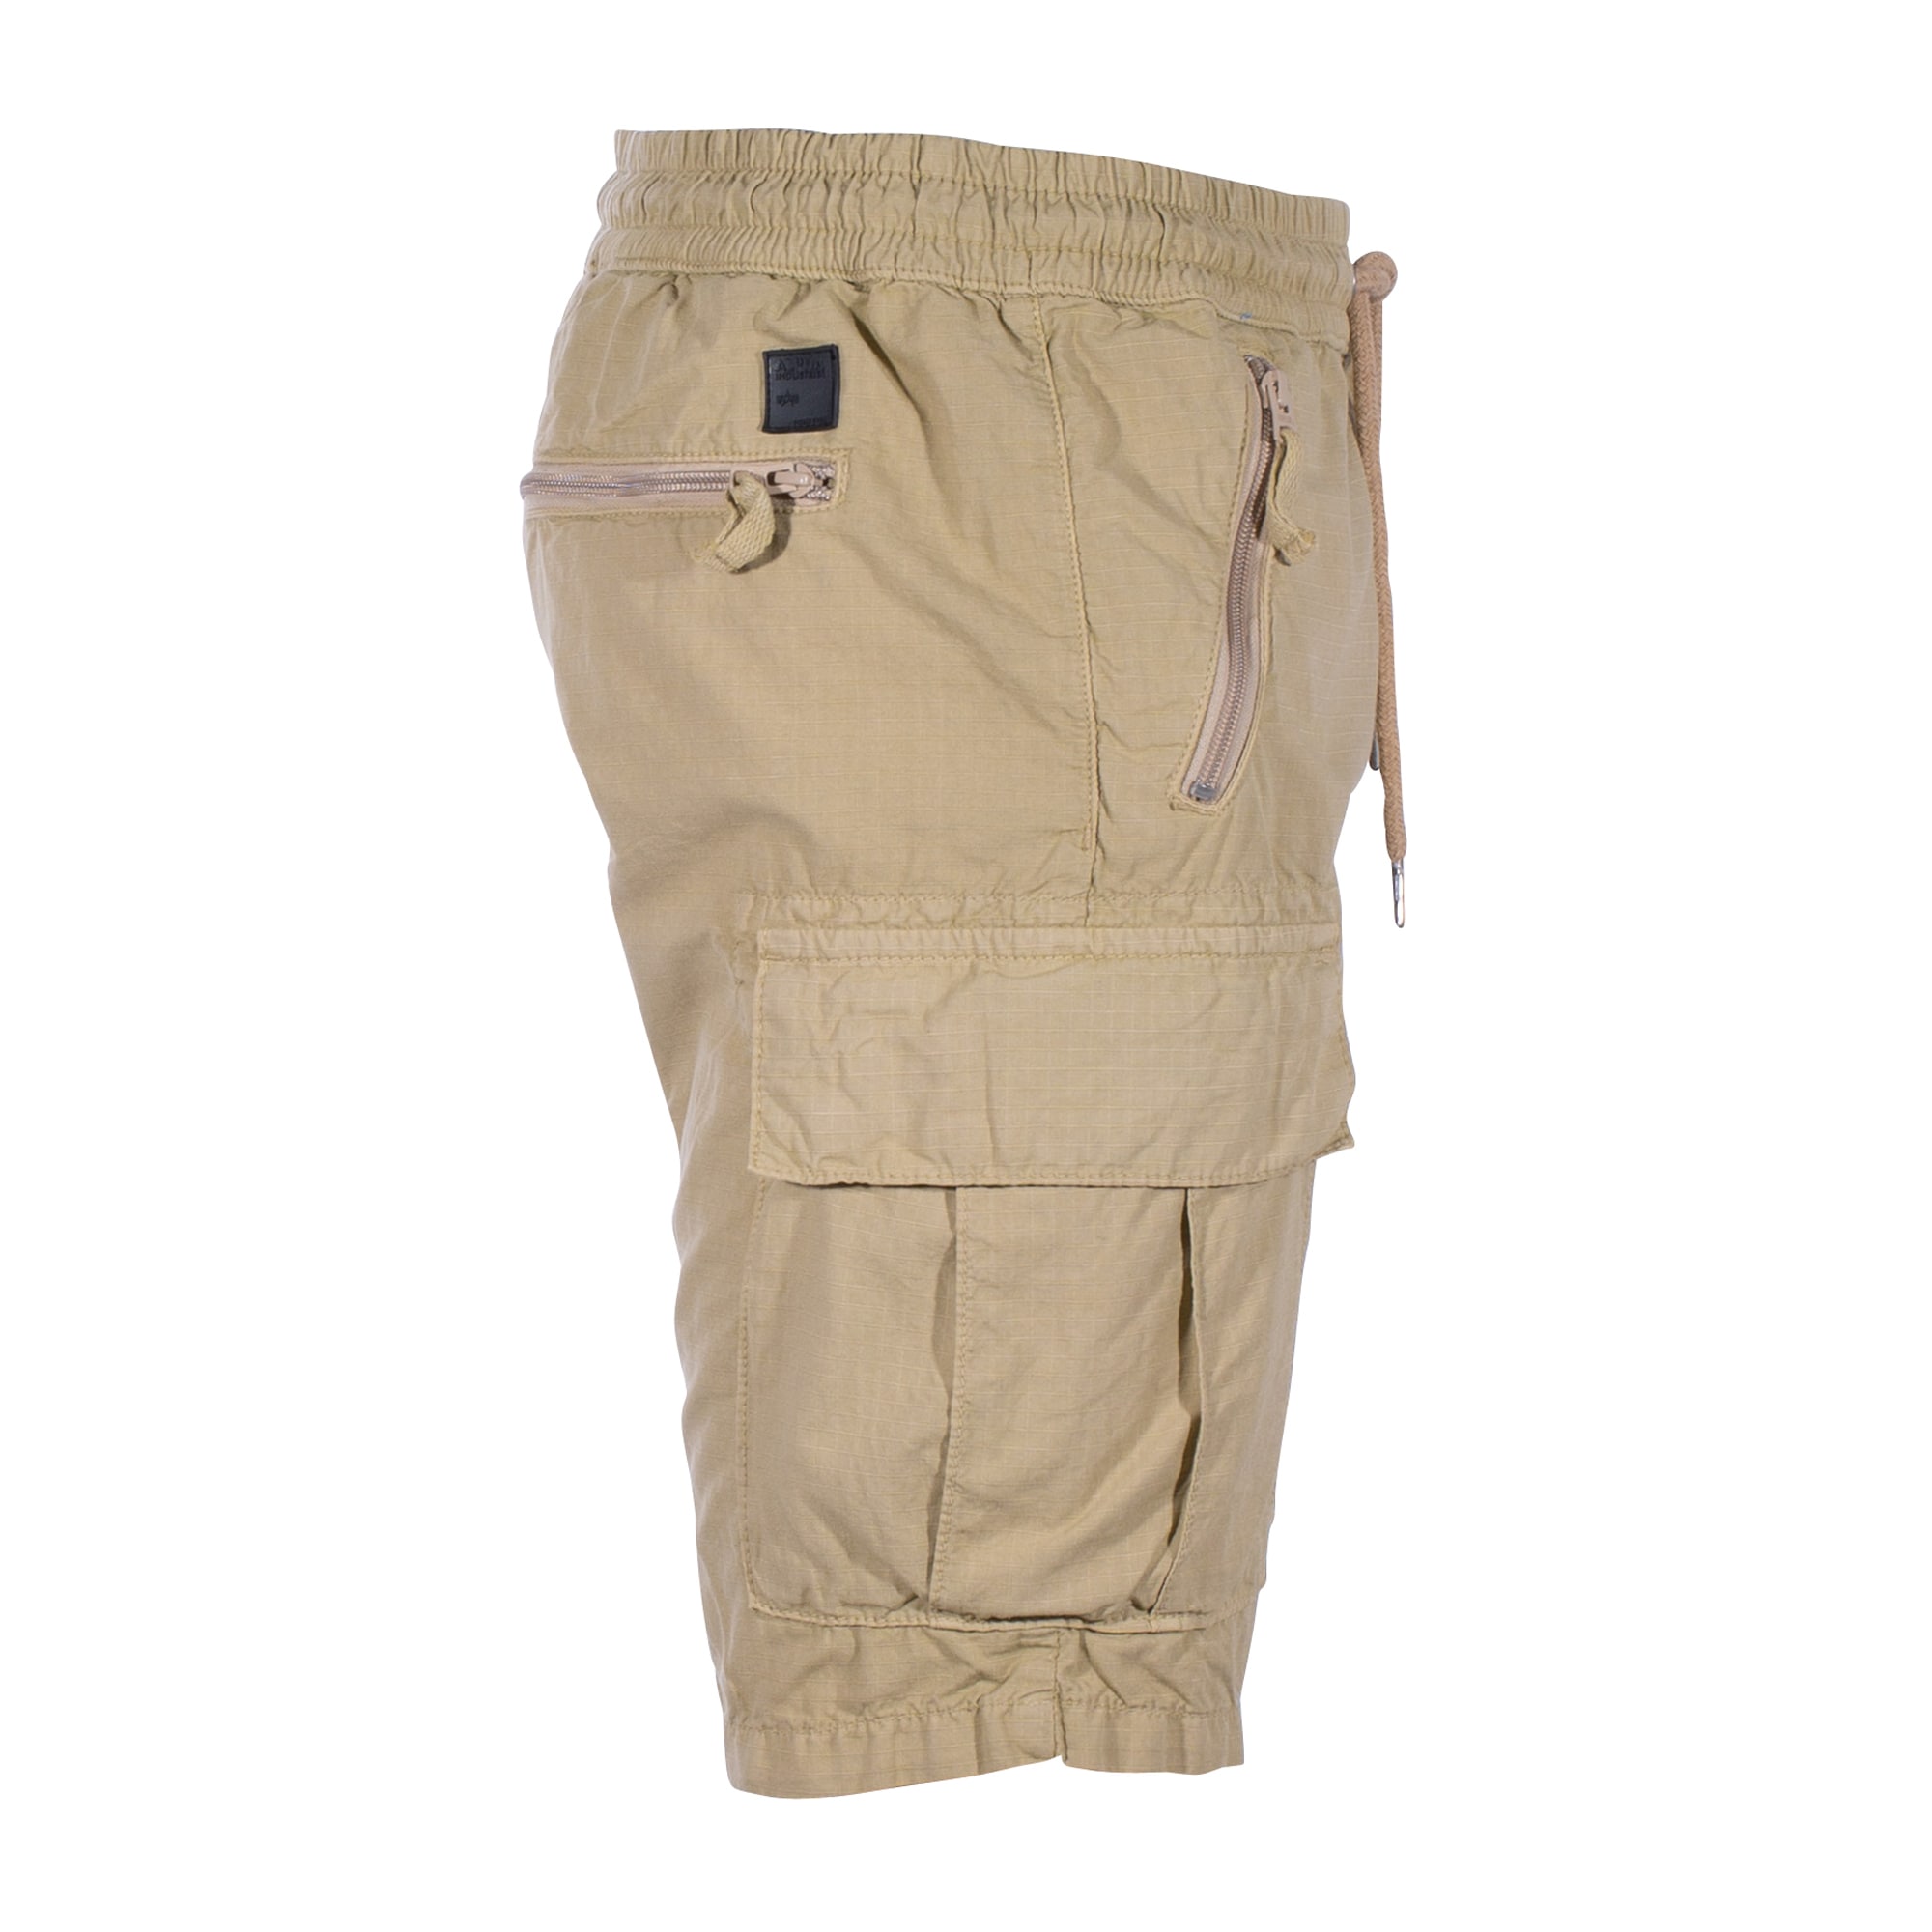 Purchase the Alpha Industries Jogger sand Ripstop ASMC Short by